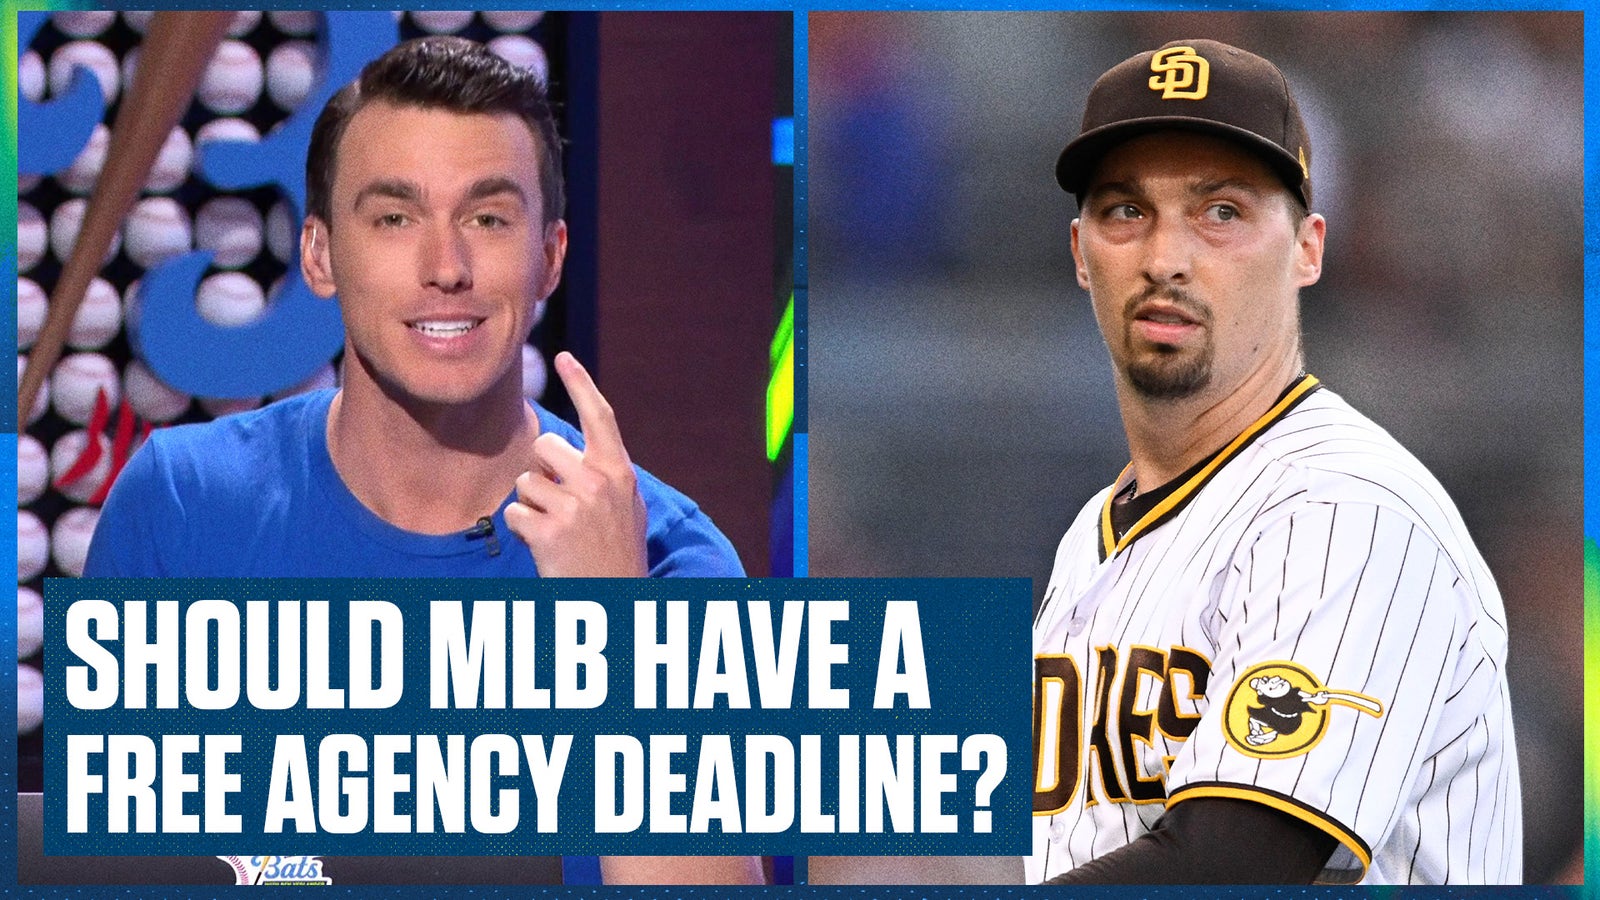 Would a free agency deadline be good for baseball?